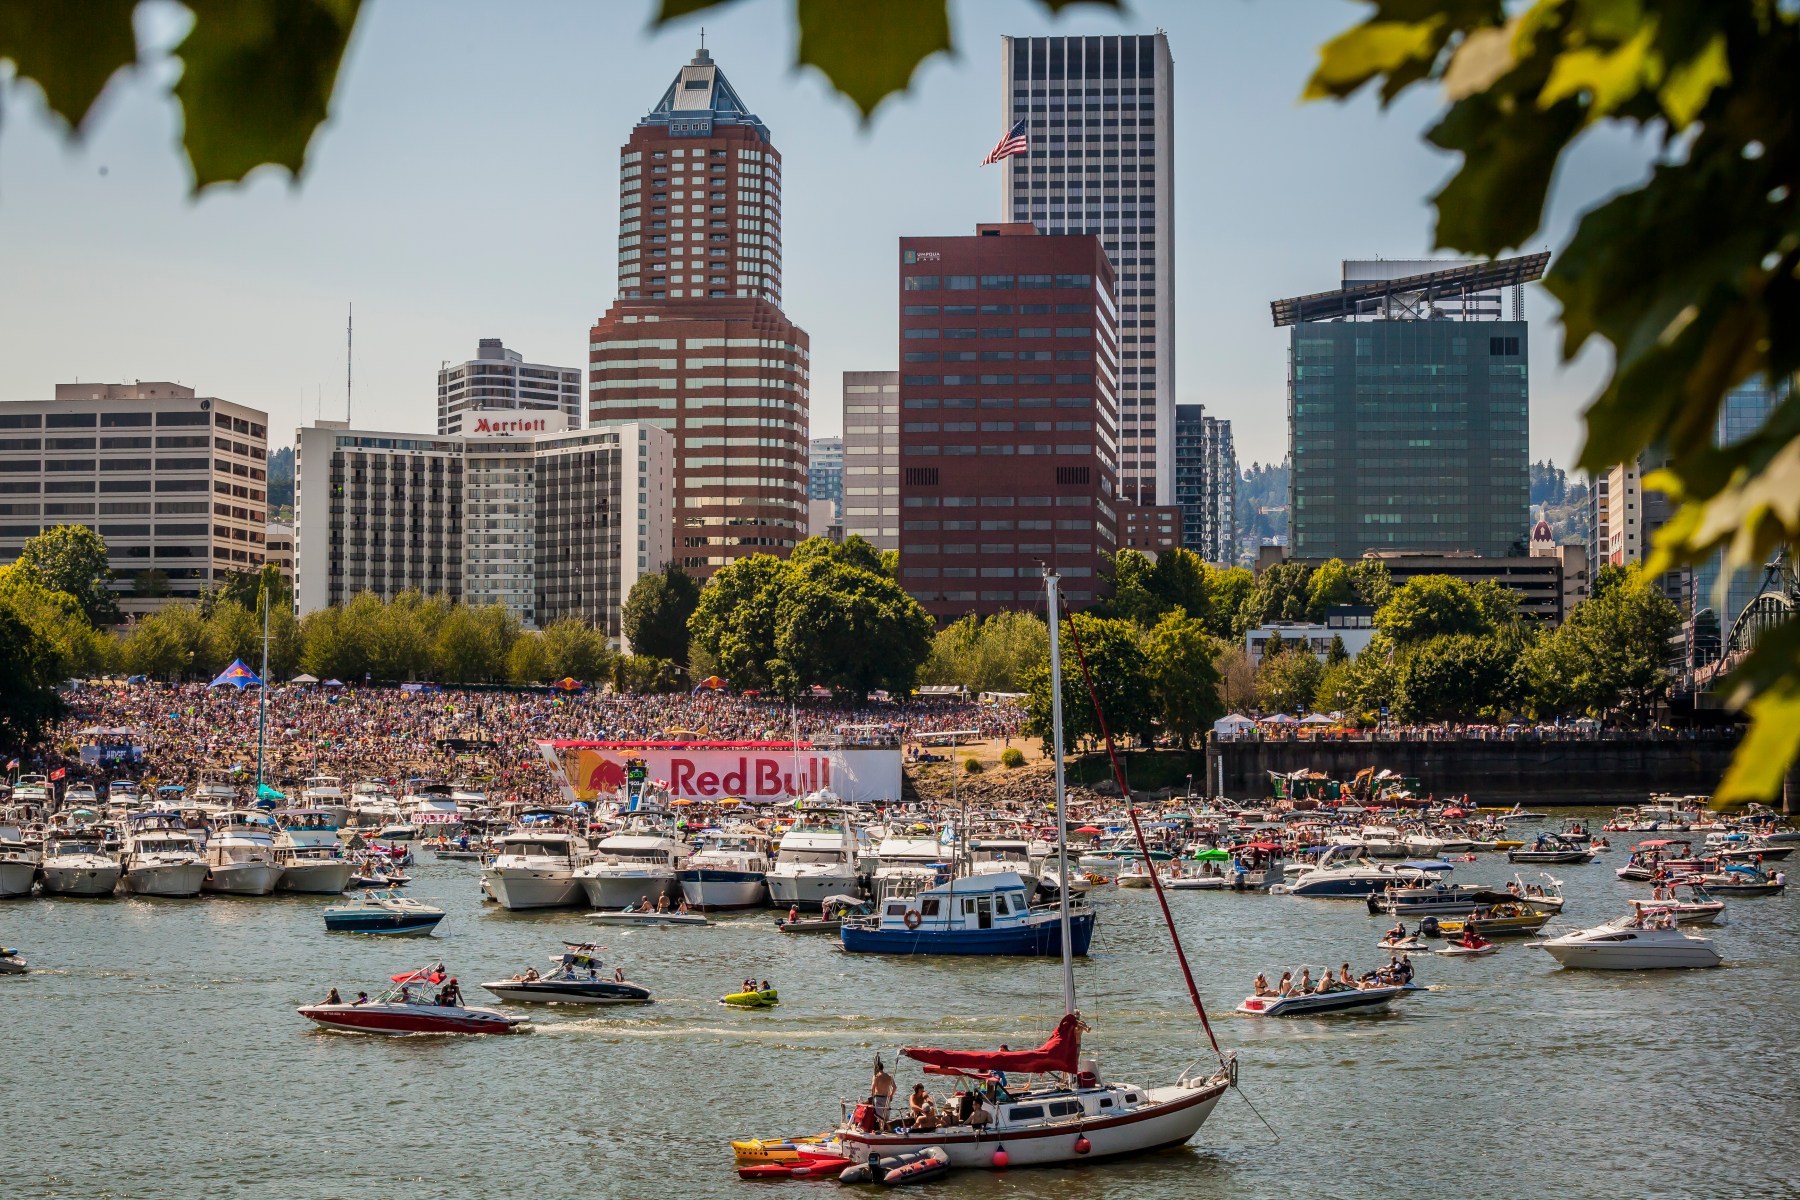 Spectators raced to claim a spot to watch the action in 2015 at the race in Portland.